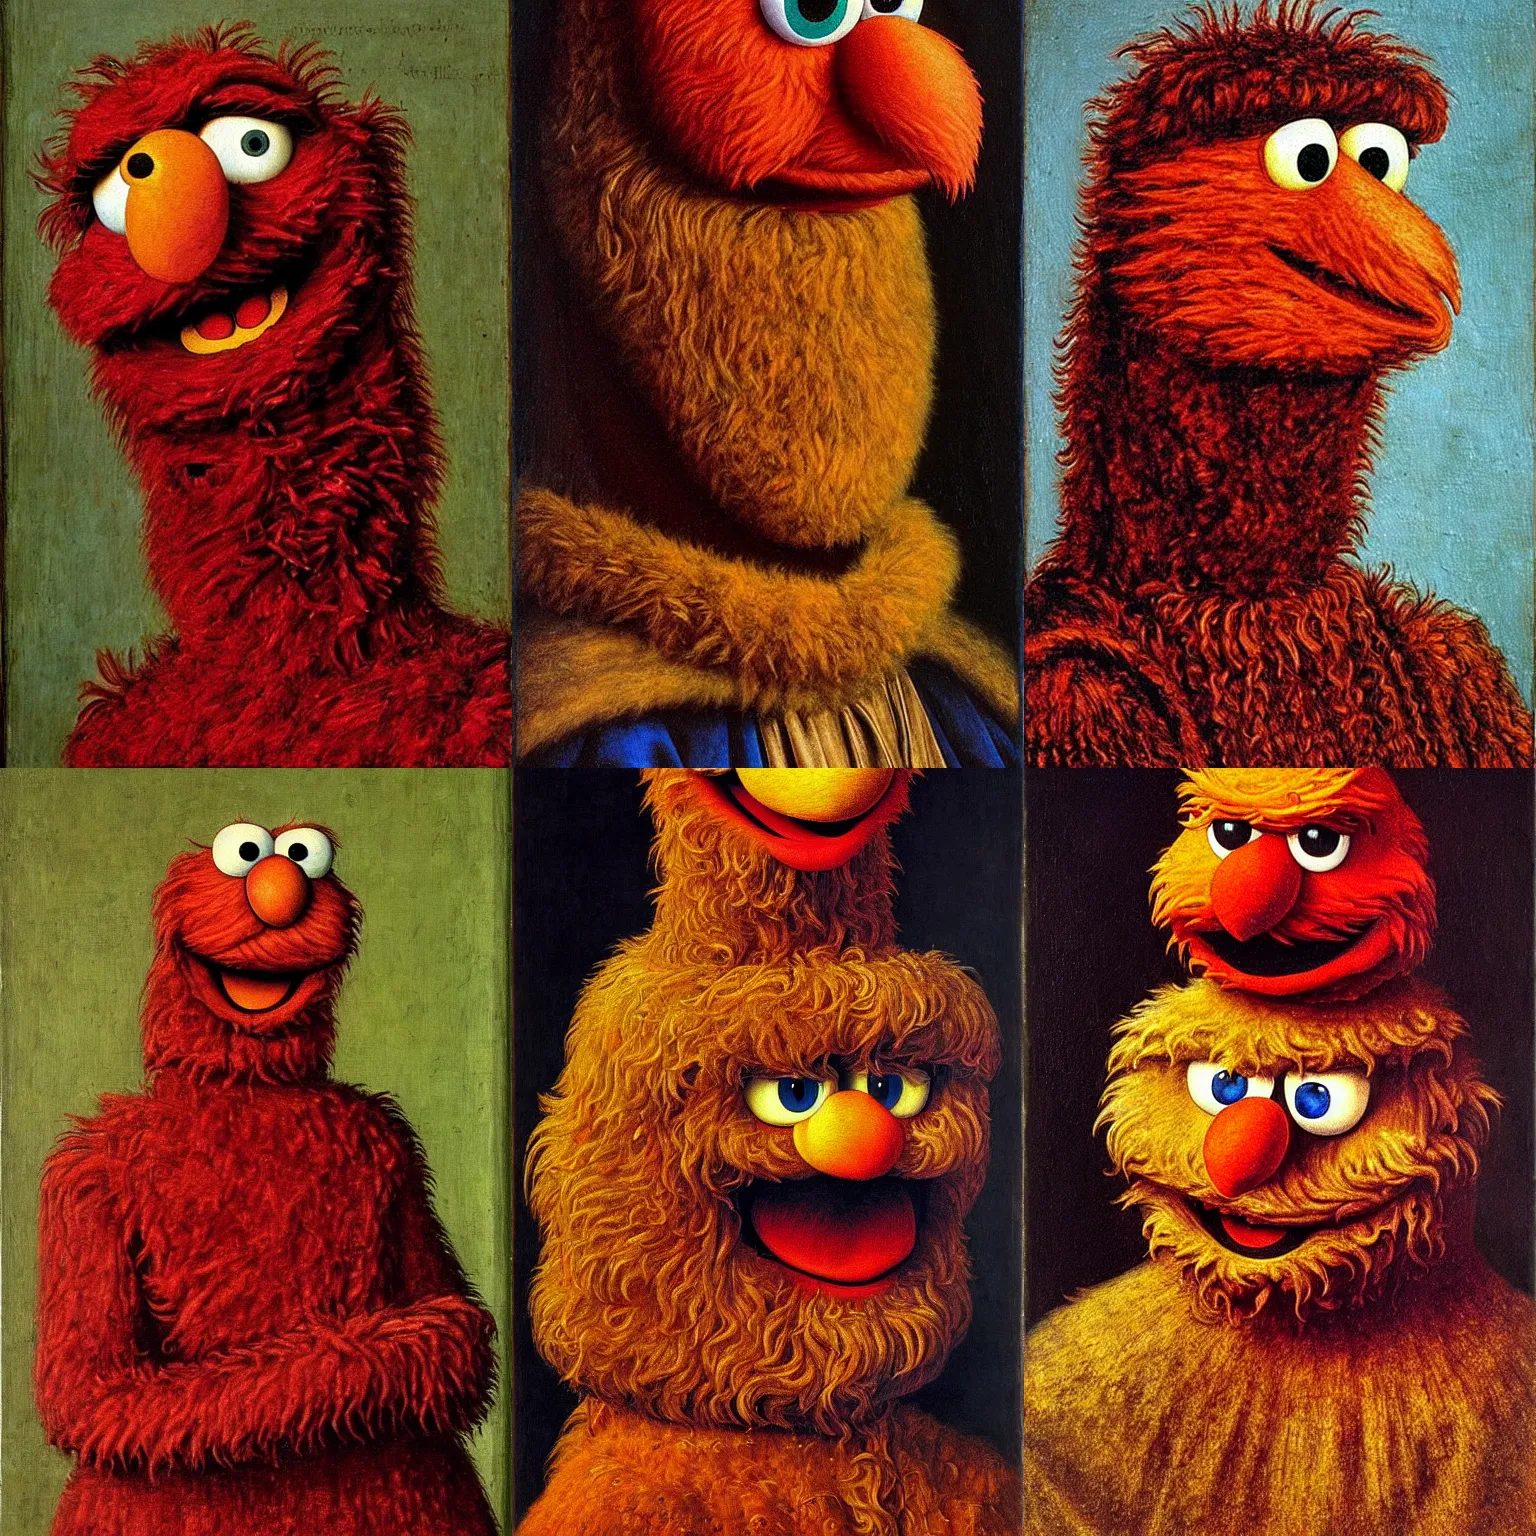 Prompt: portrait of elmo from sesame street, oil painting by jan van eyck, northern renaissance art, oil on canvas, wet - on - wet technique, realistic, expressive emotions, intricate textures, illusionistic detail